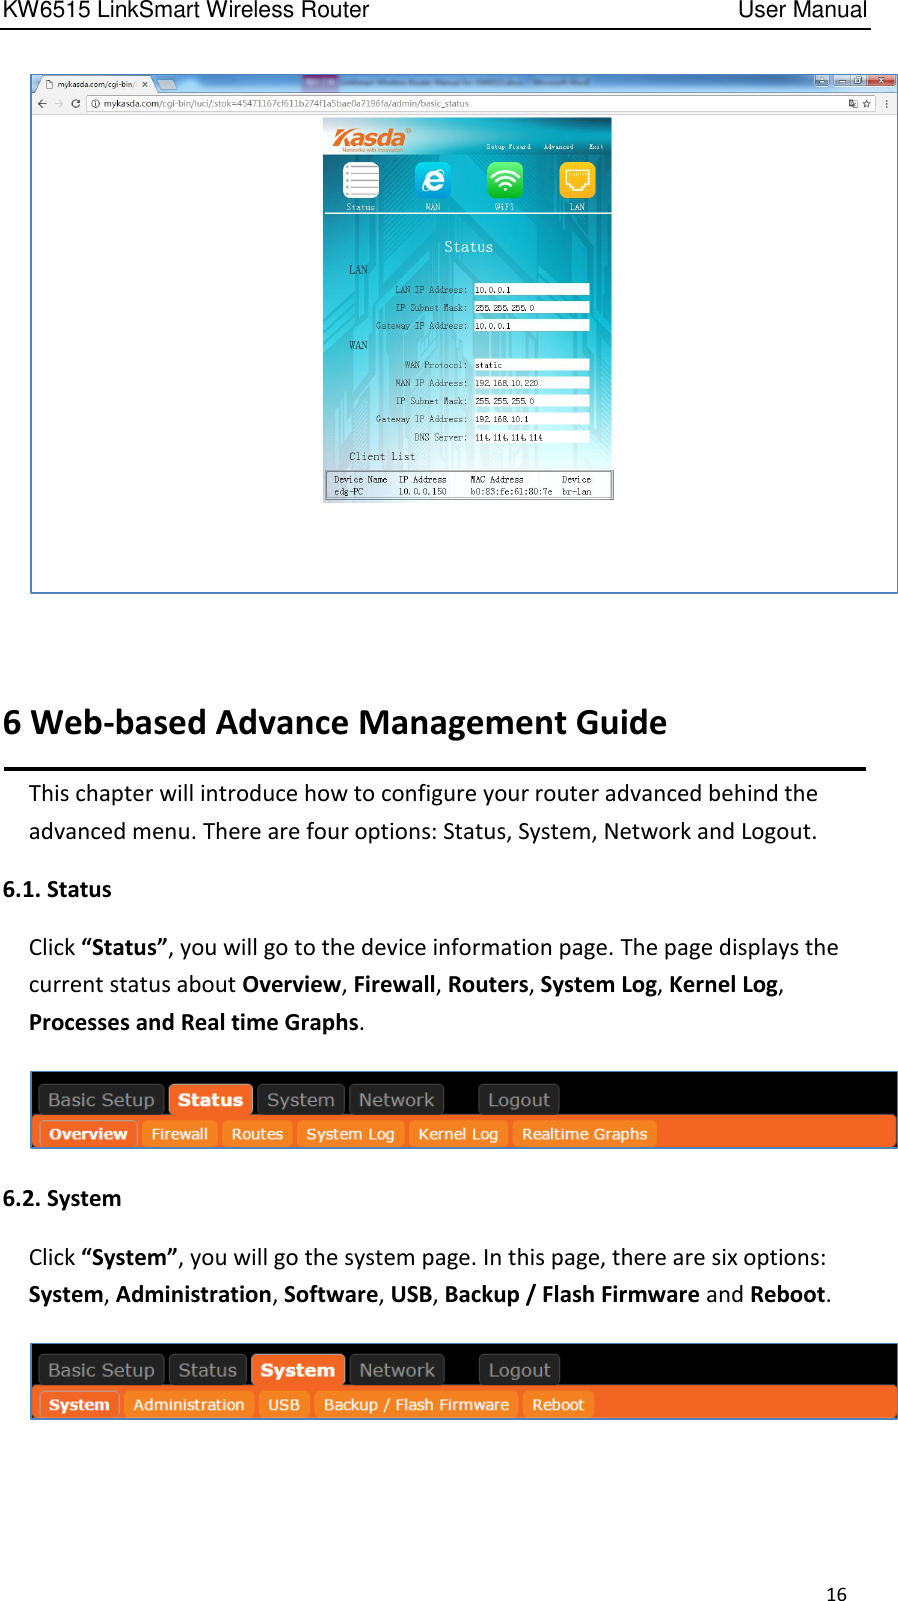 KW6515 LinkSmart Wireless Router         User Manual 16   6 Web-based Advance Management Guide This chapter will introduce how to configure your router advanced behind the advanced menu. There are four options: Status, System, Network and Logout.   6.1. Status Click “Status”, you will go to the device information page. The page displays the current status about Overview, Firewall, Routers, System Log, Kernel Log, Processes and Real time Graphs.    6.2. System Click “System”, you will go the system page. In this page, there are six options: System, Administration, Software, USB, Backup / Flash Firmware and Reboot.   